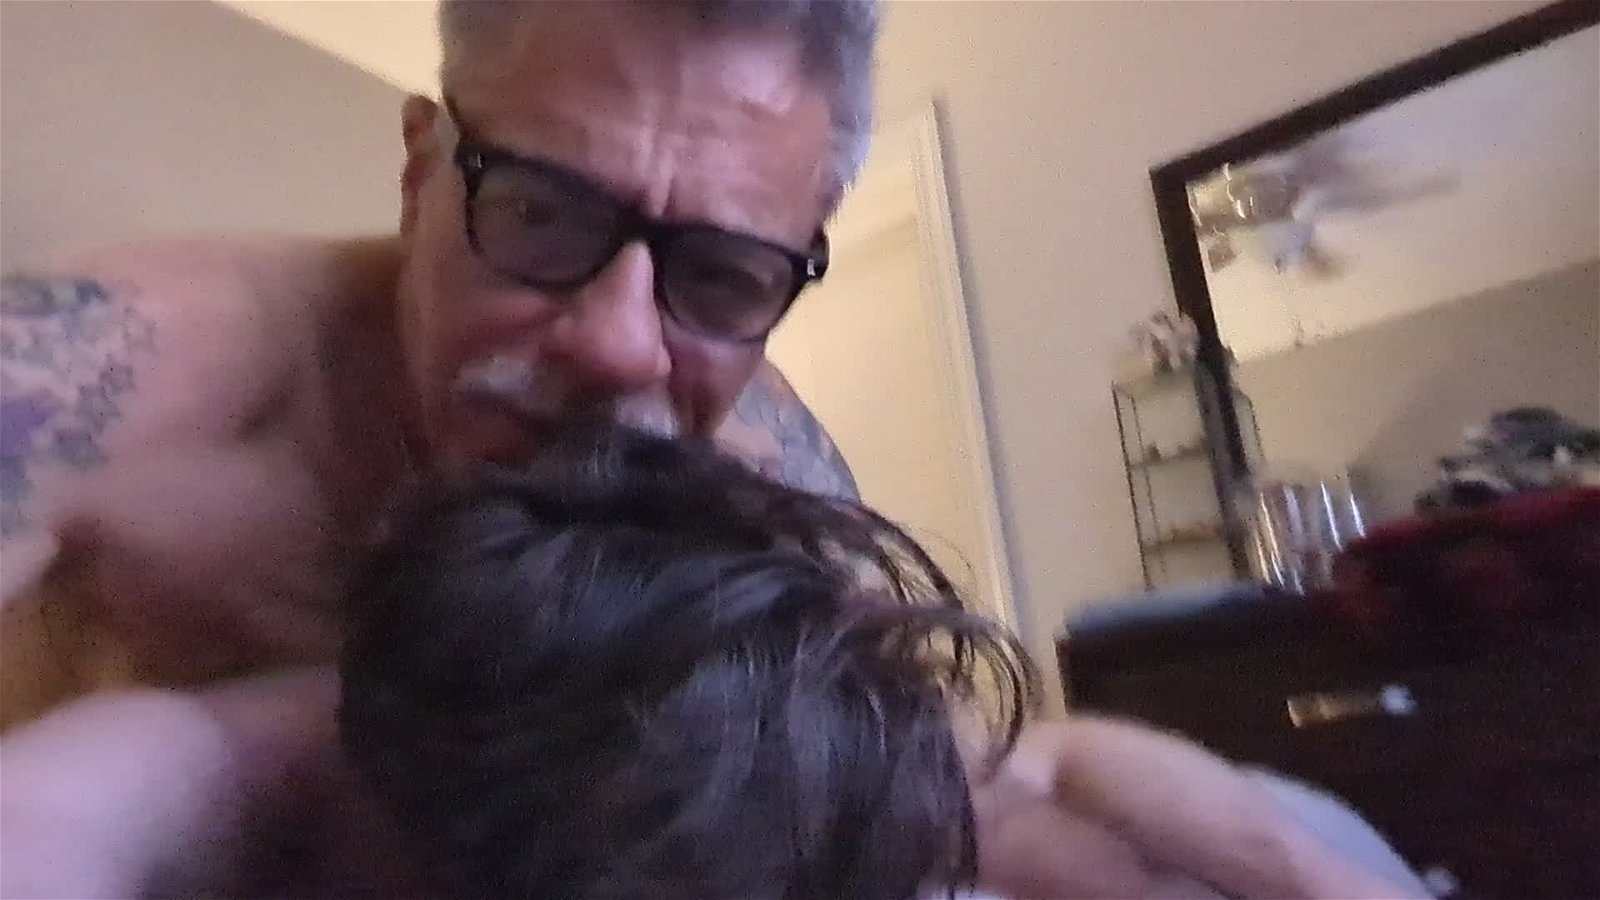 Video post by Daddy and his boy